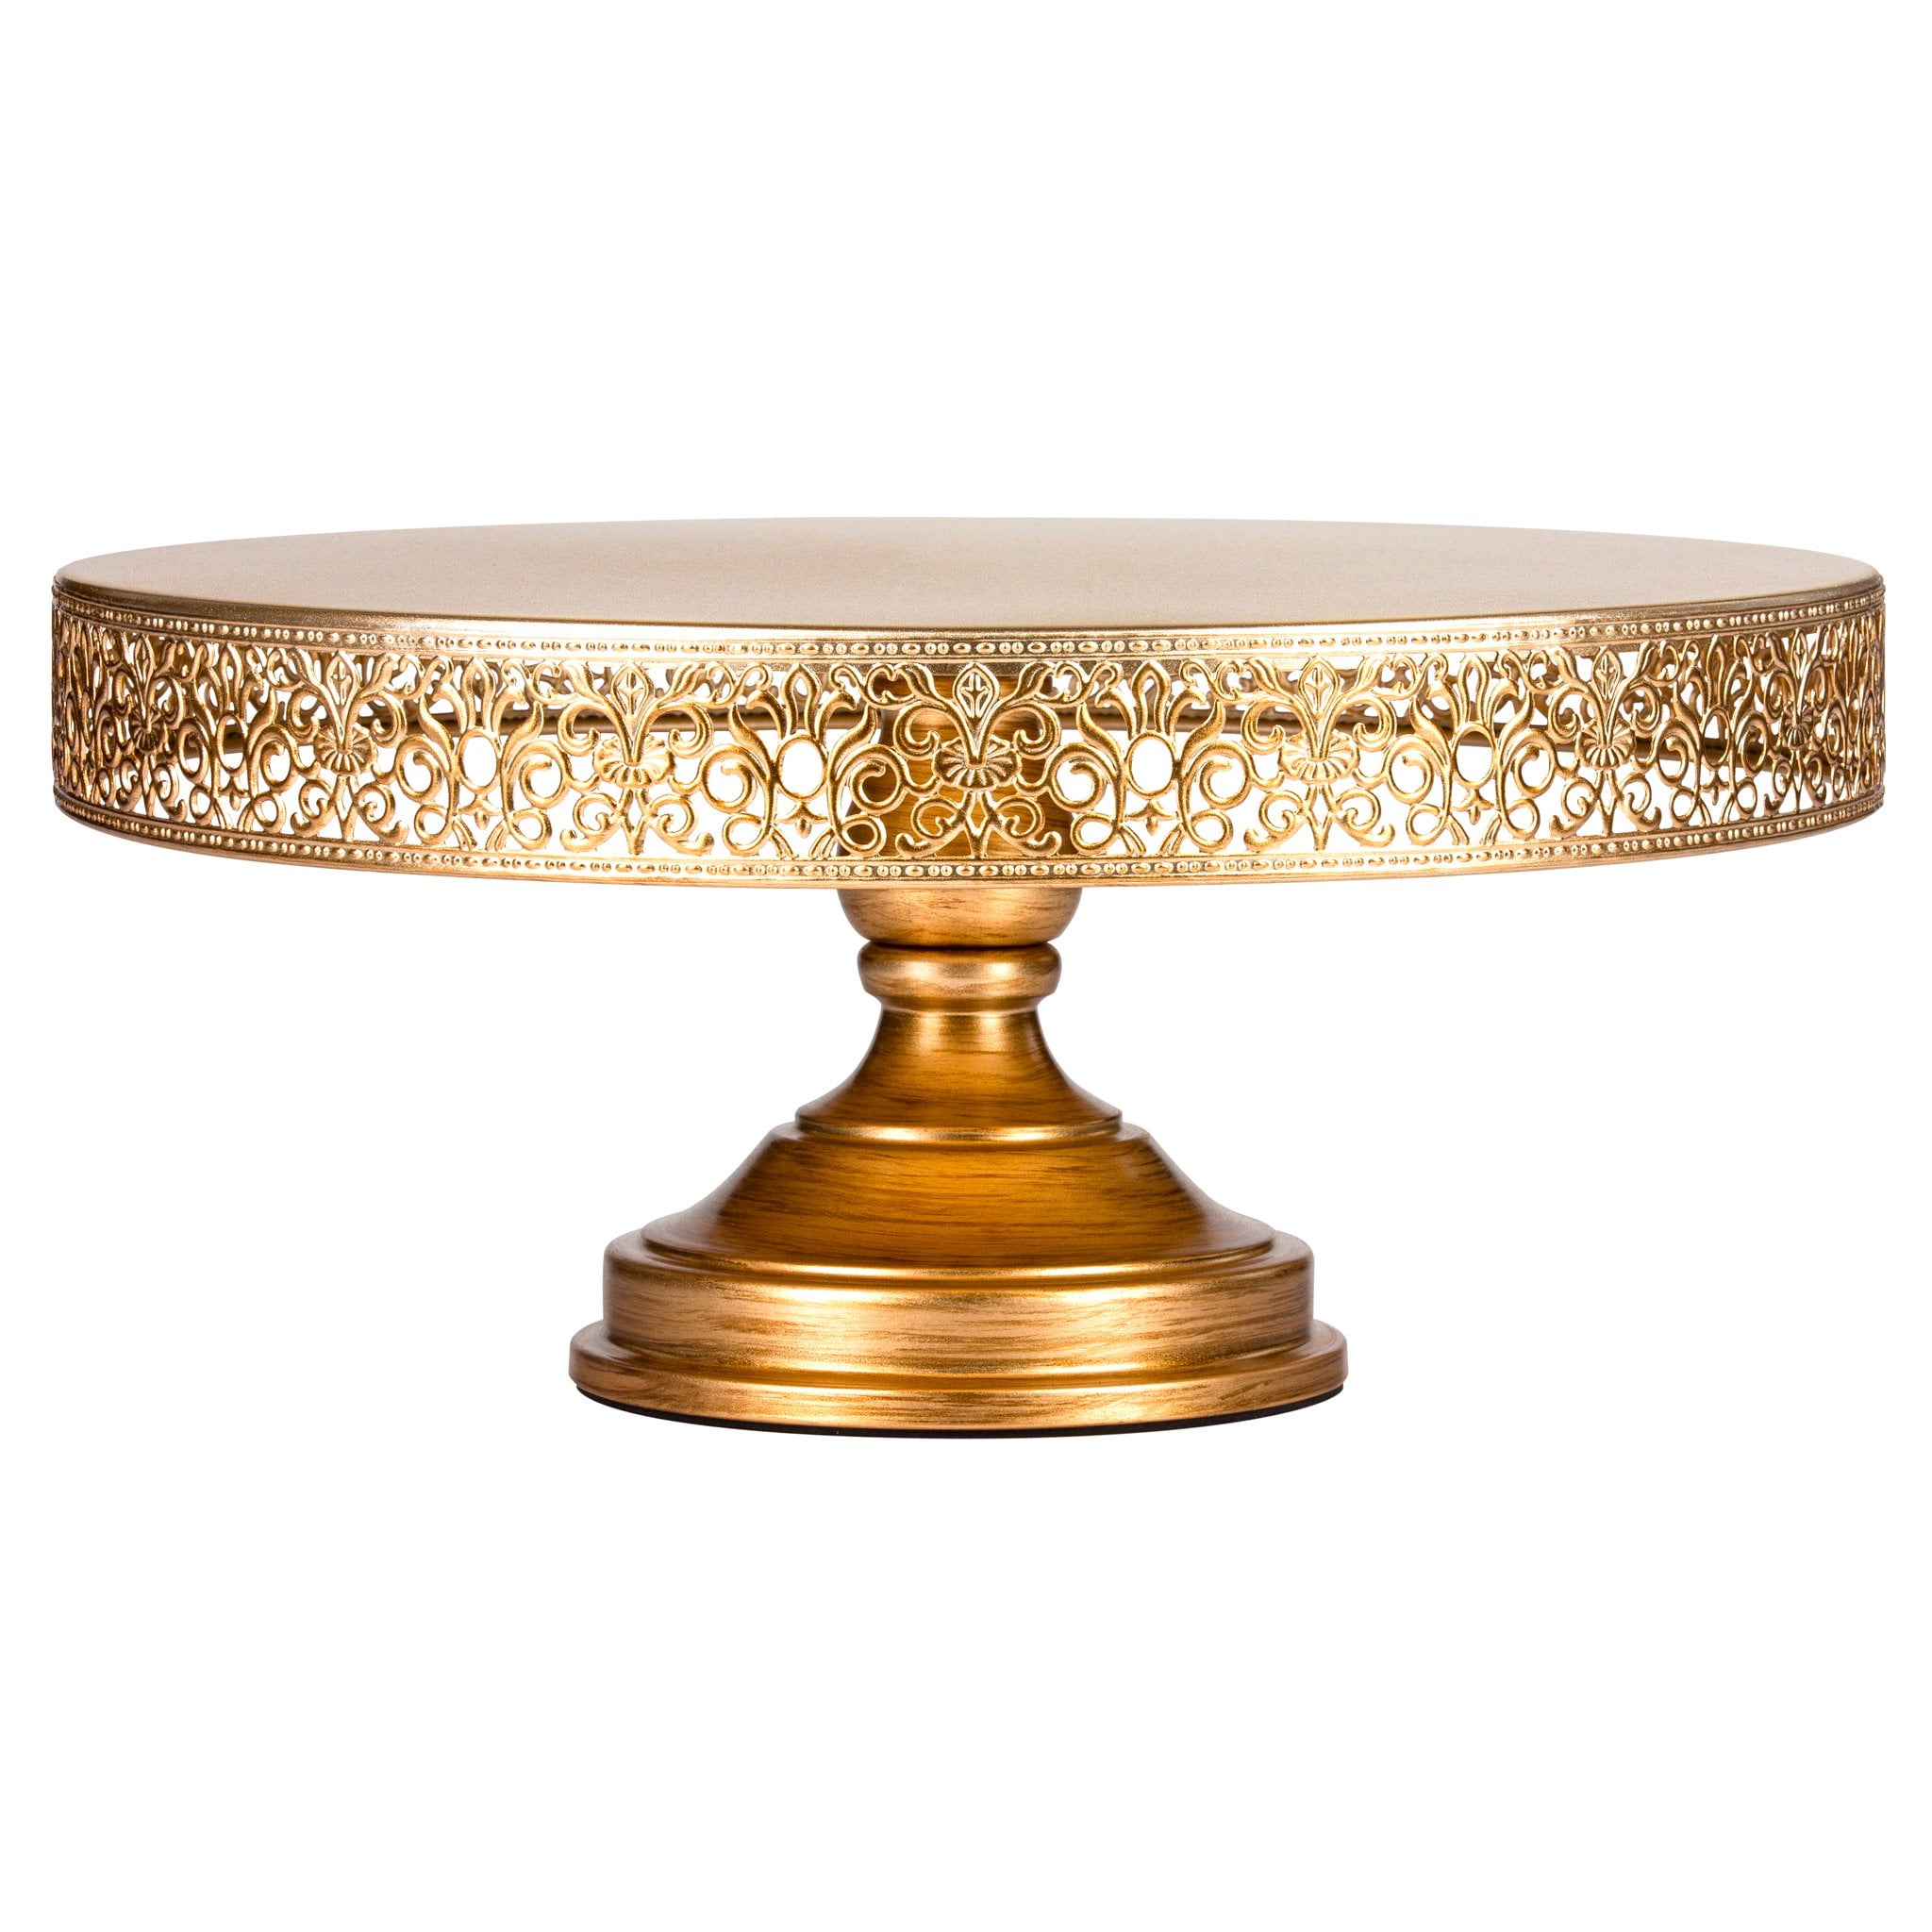 silver stand 18 inch gold stand 22 inch  Wood cake stand shabby white stand CAKE STAND distreessed gold stand